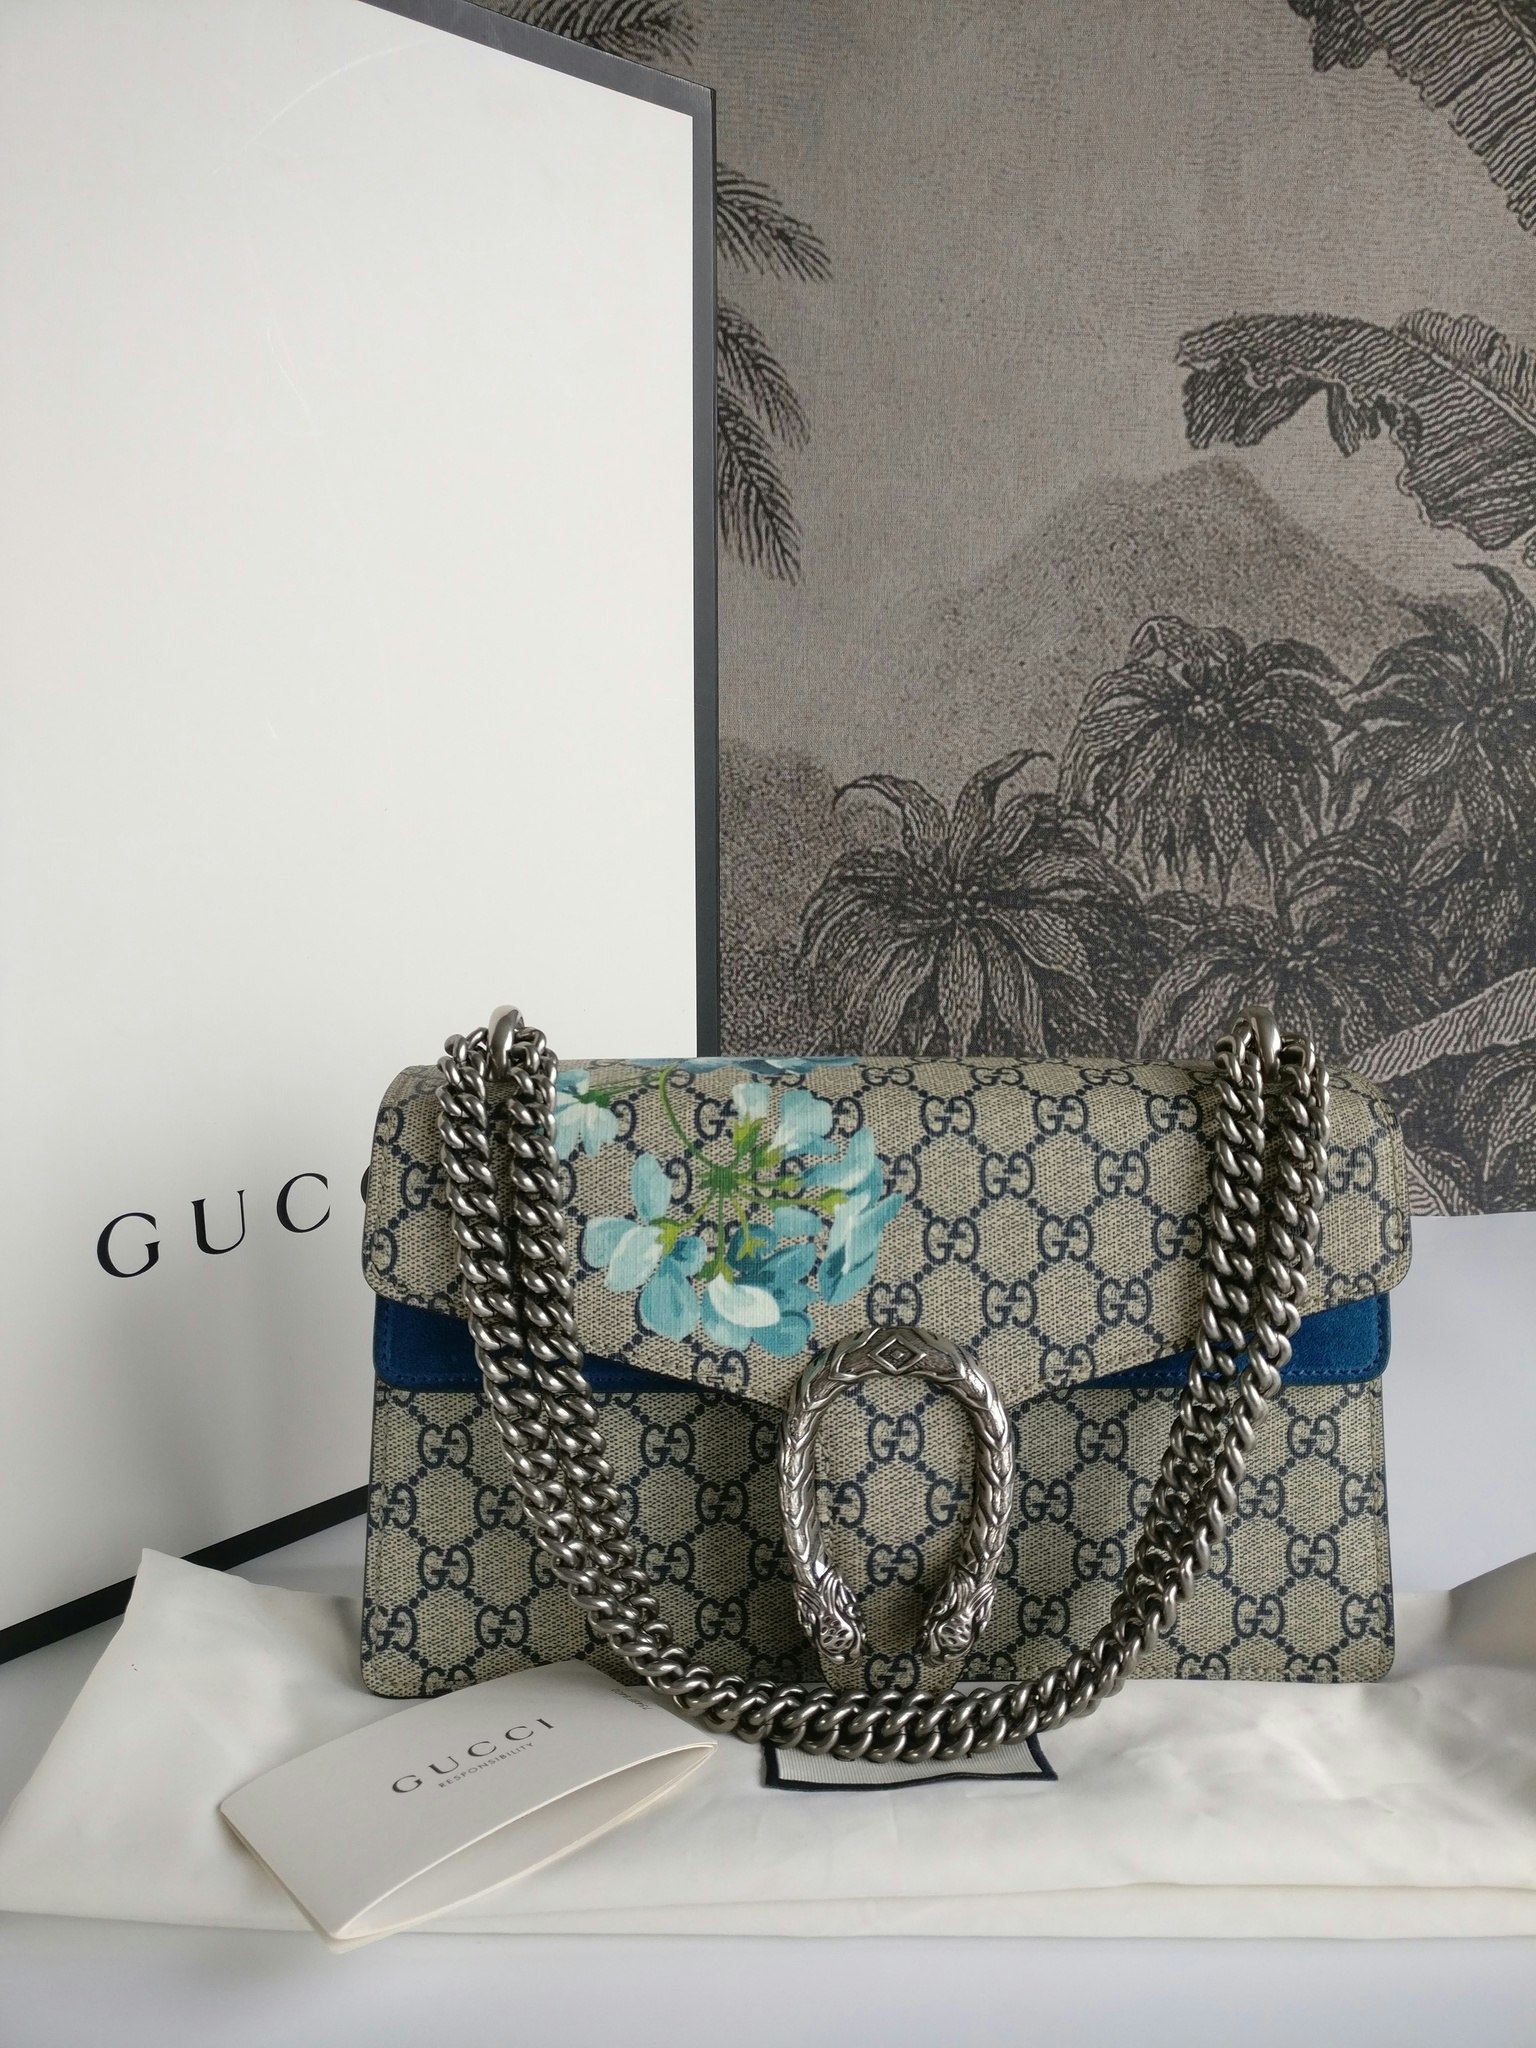 Gucci Dionysus GG Blooms Small - Good or Bag